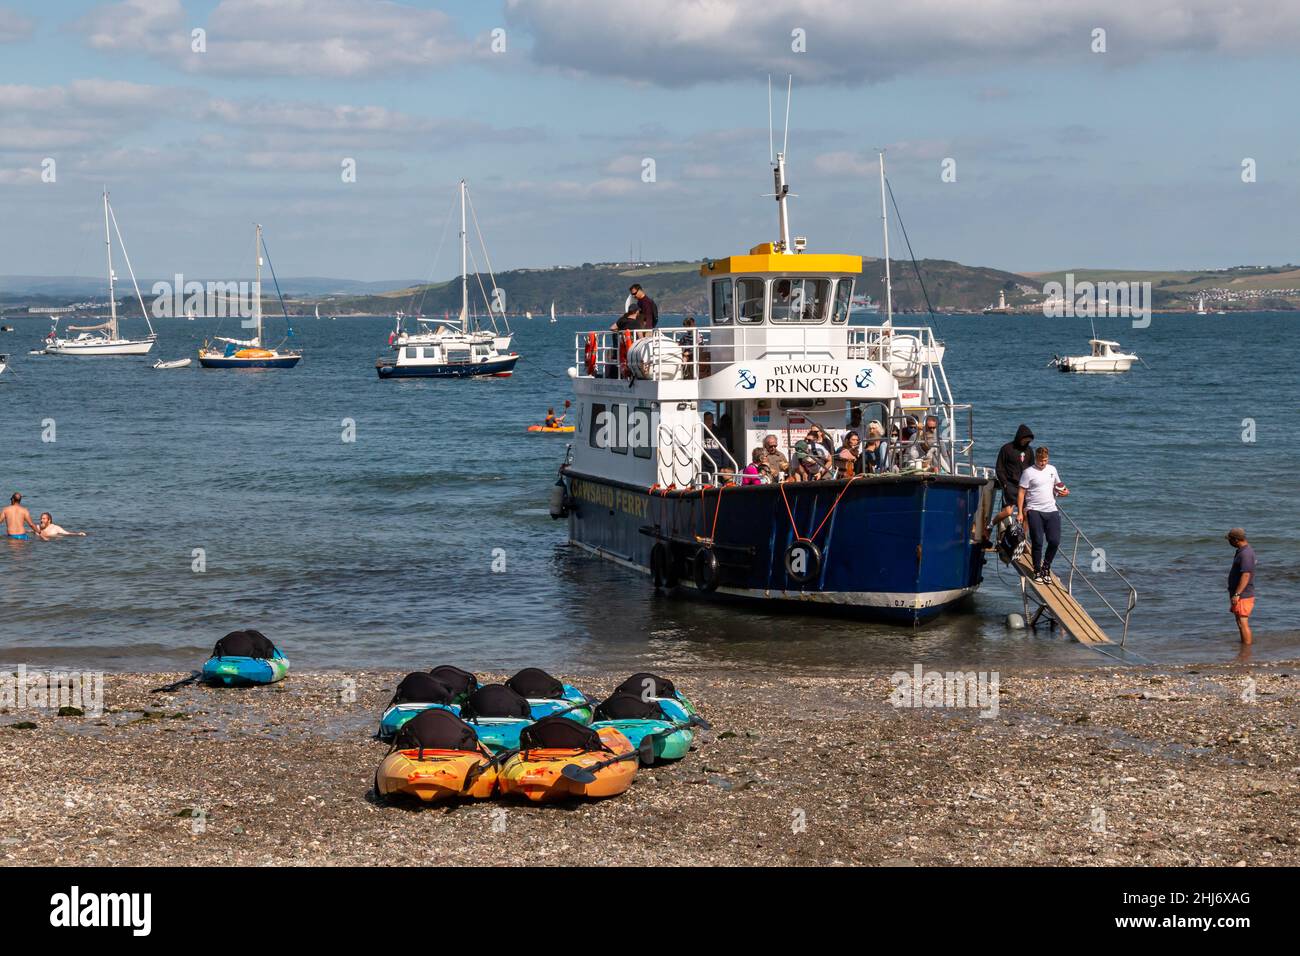 The foot ferry, The Plymouth Princess, arrives at Cawsand beach.  Cornwall, UK Stock Photo